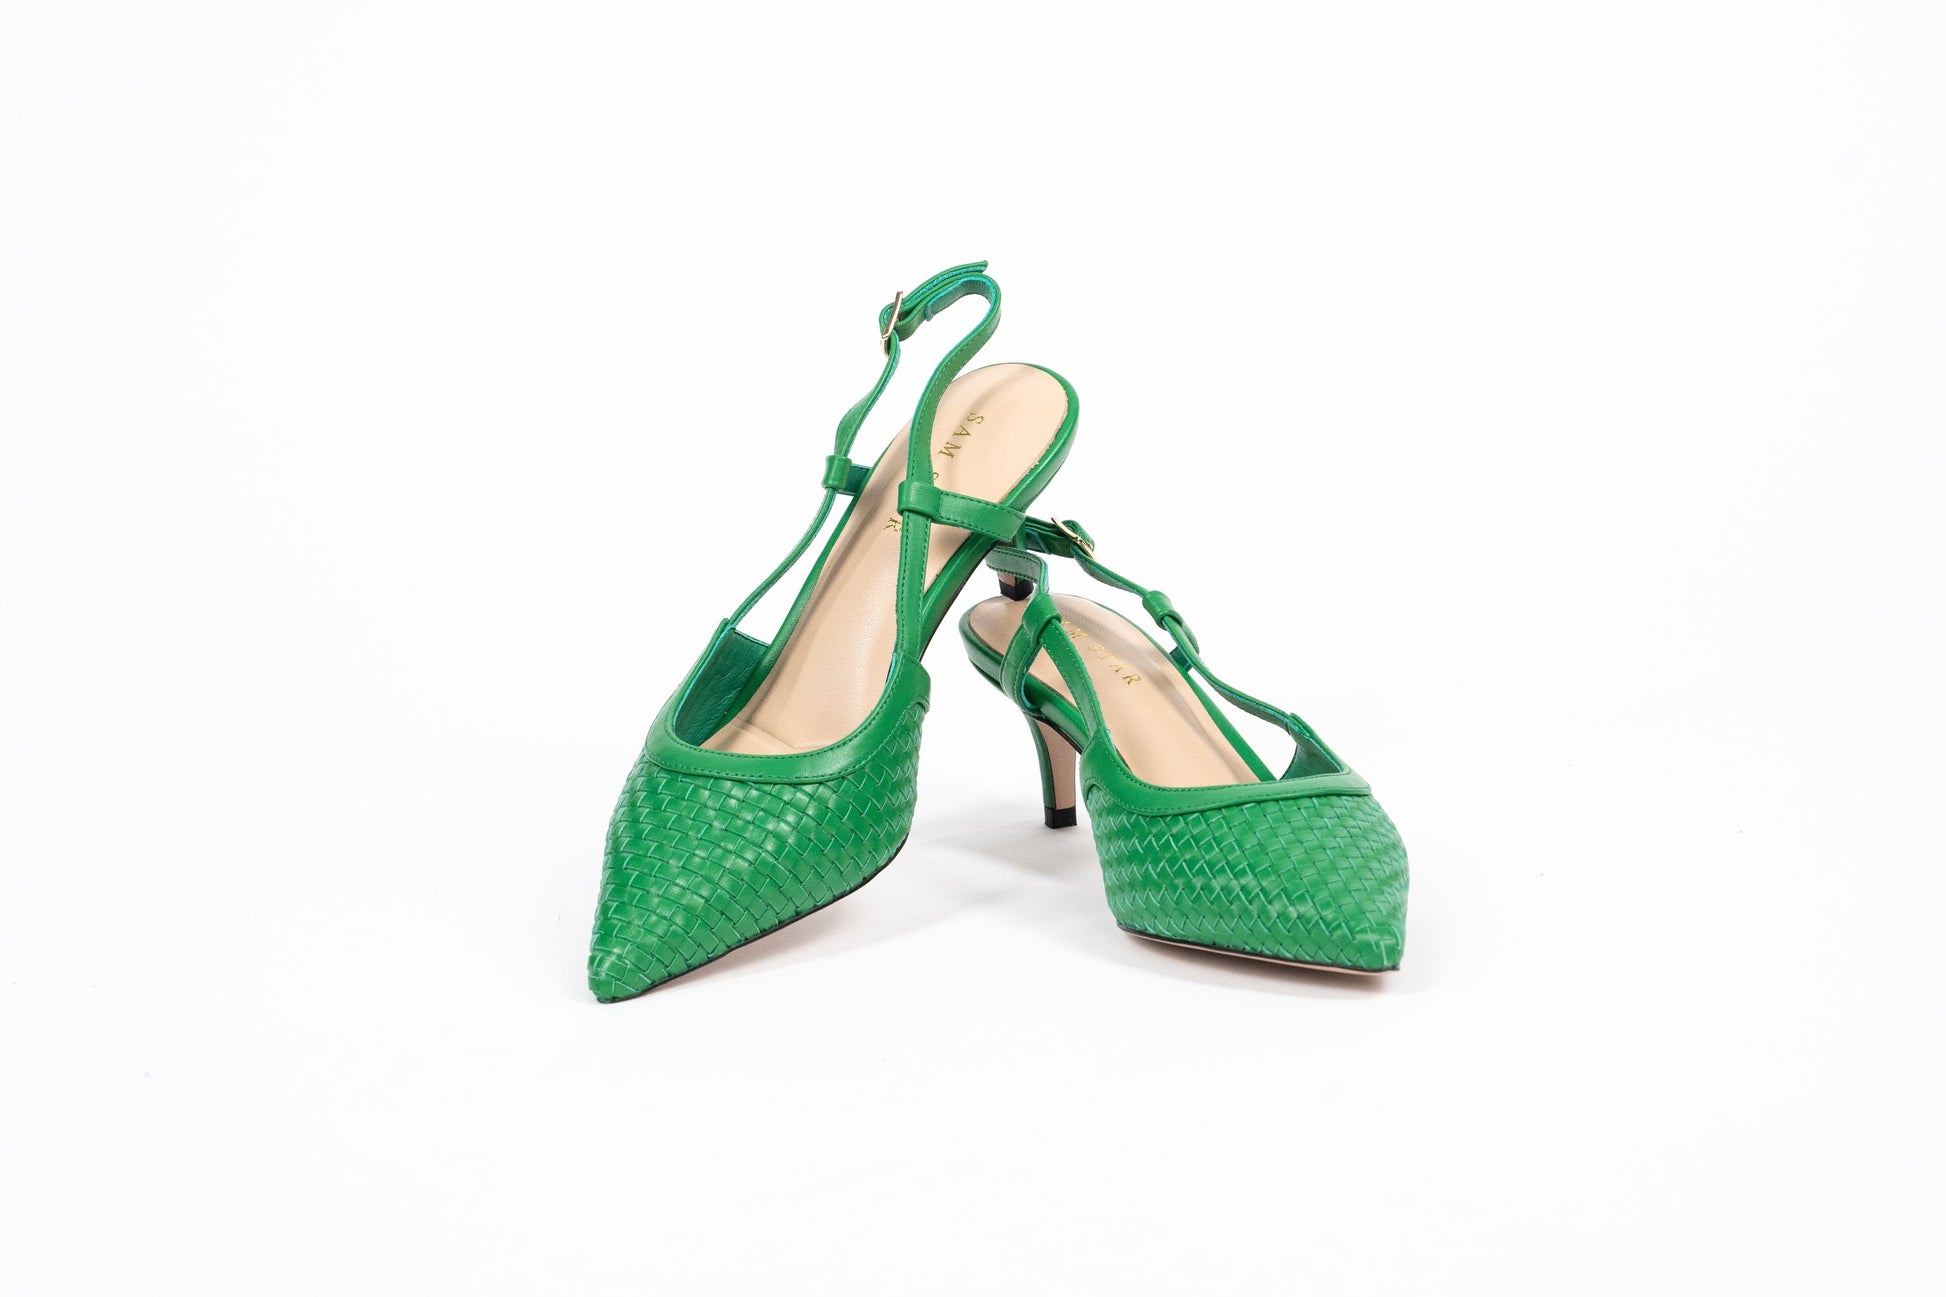 SS23010 Leather woven court shoes - Green (New Arrival) ladies shoes Sam Star shoes 